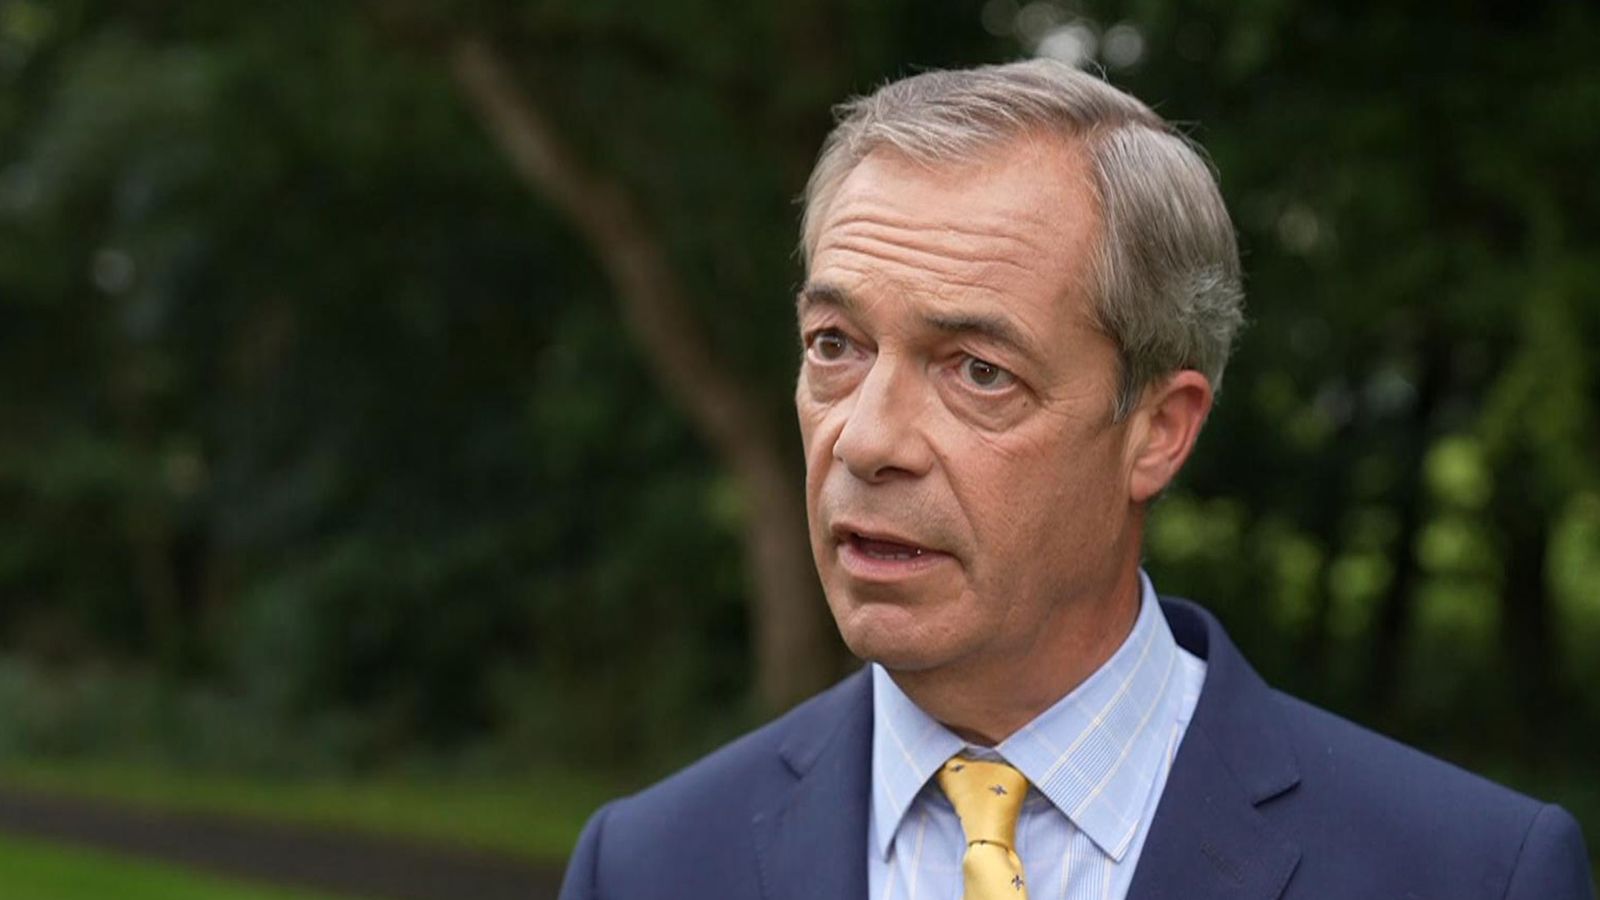 Nigel Farage Receives Apology from BBC Over Inaccurate Report on Bank Account Closure